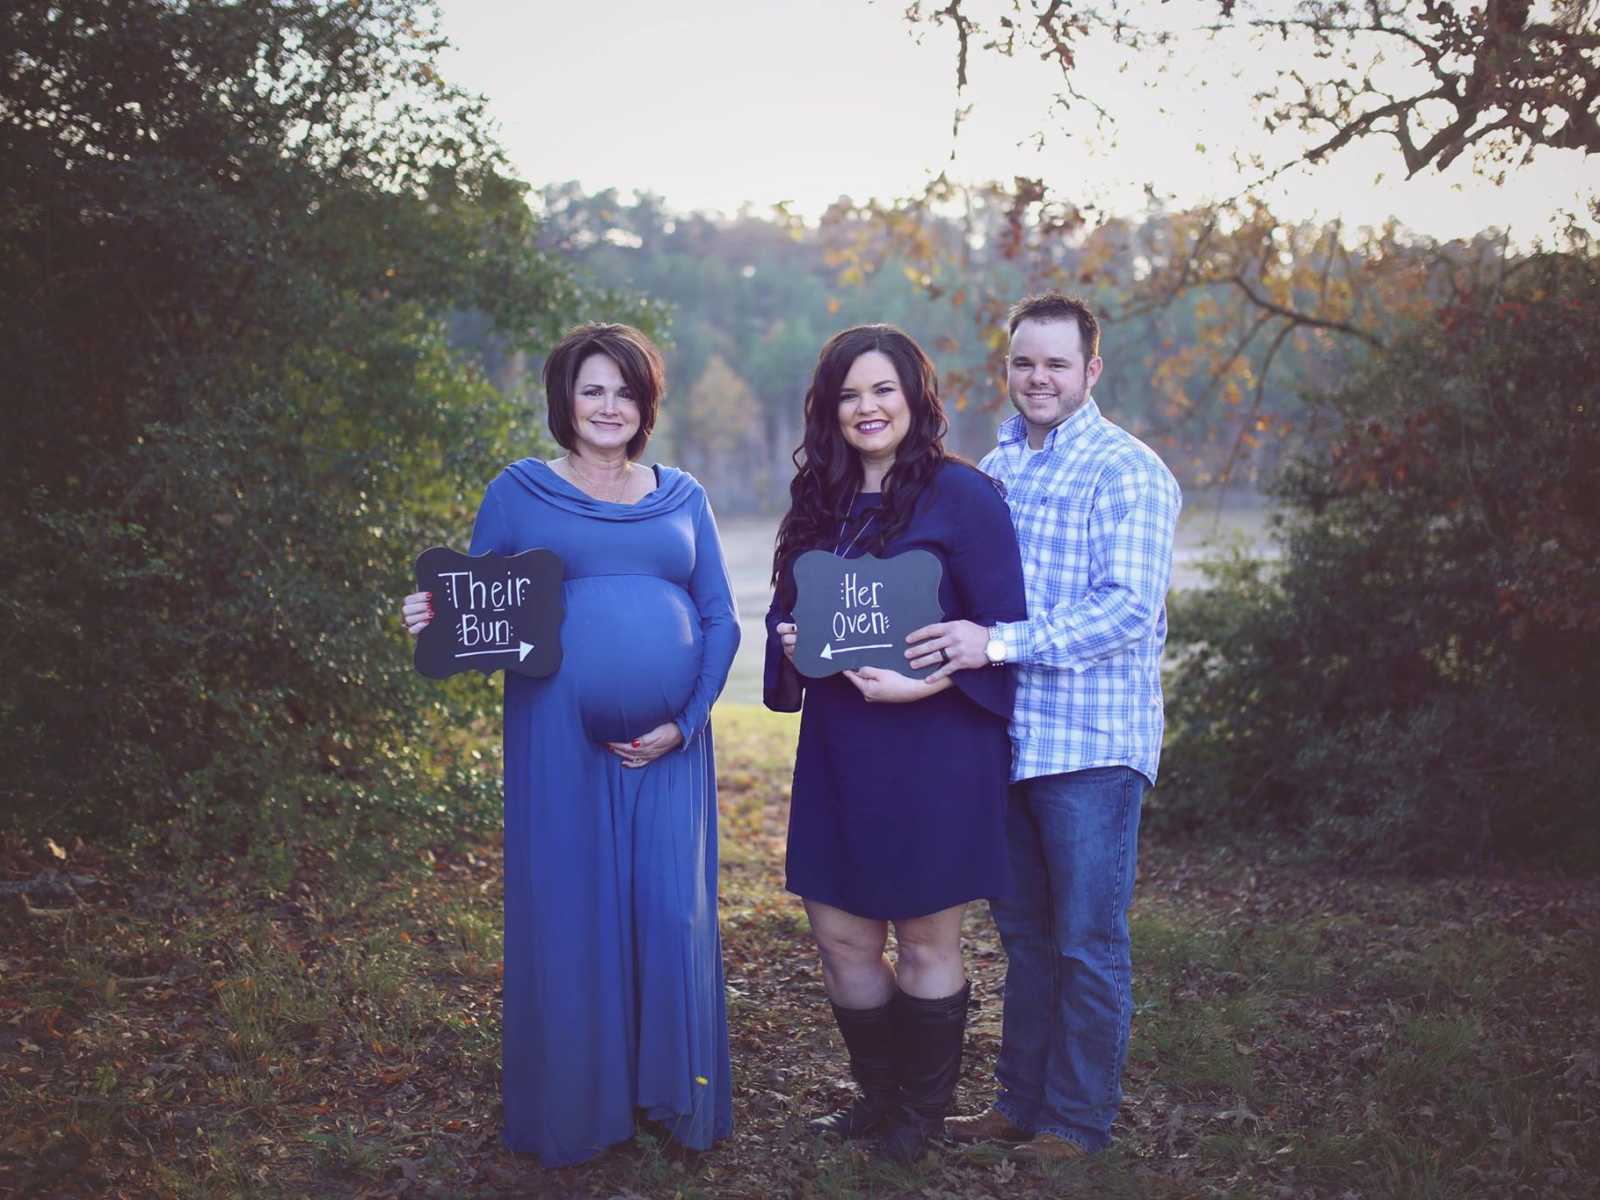 Pregnant woman stands in a field holding a sign saying, "their bun" and couple to the right holds a sign saying, "her oven"